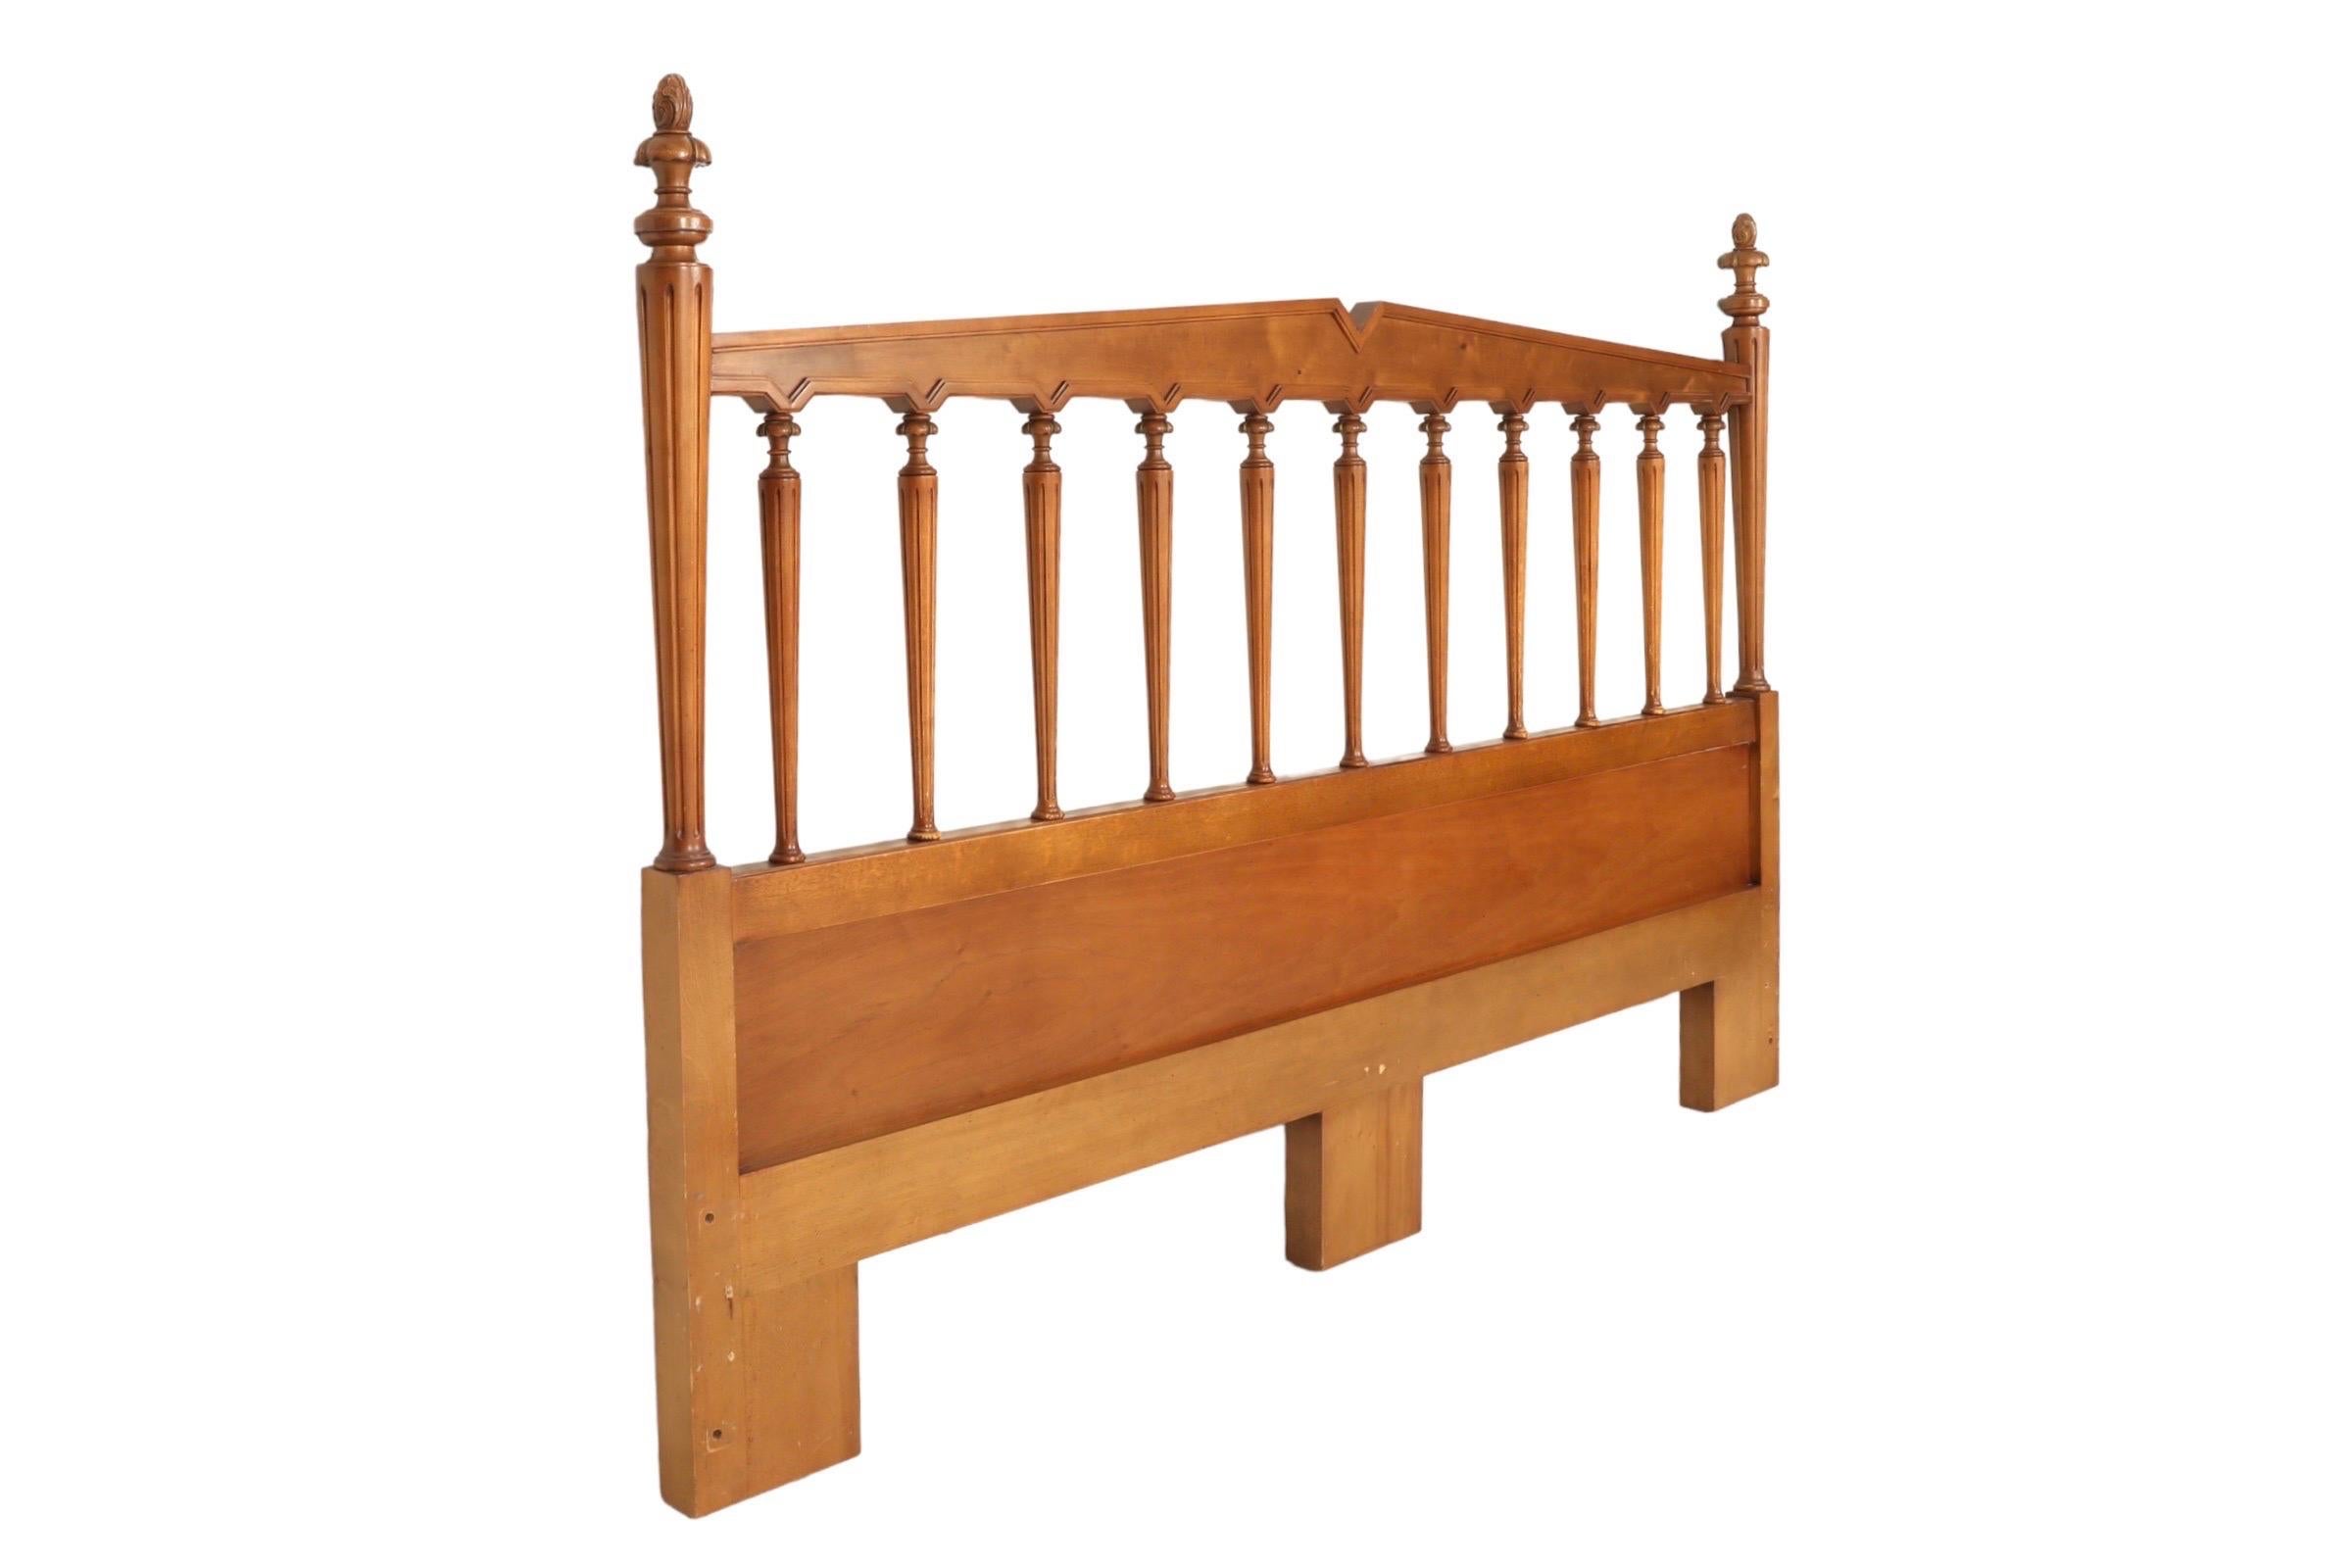 A custom made king size headboard made of maple. Clean beveled lines form a traditional crest rail supported with 11 turned posts. Outside posts at each end are topped with acanthus frills and acorn finials. In the back reads “Custom built to